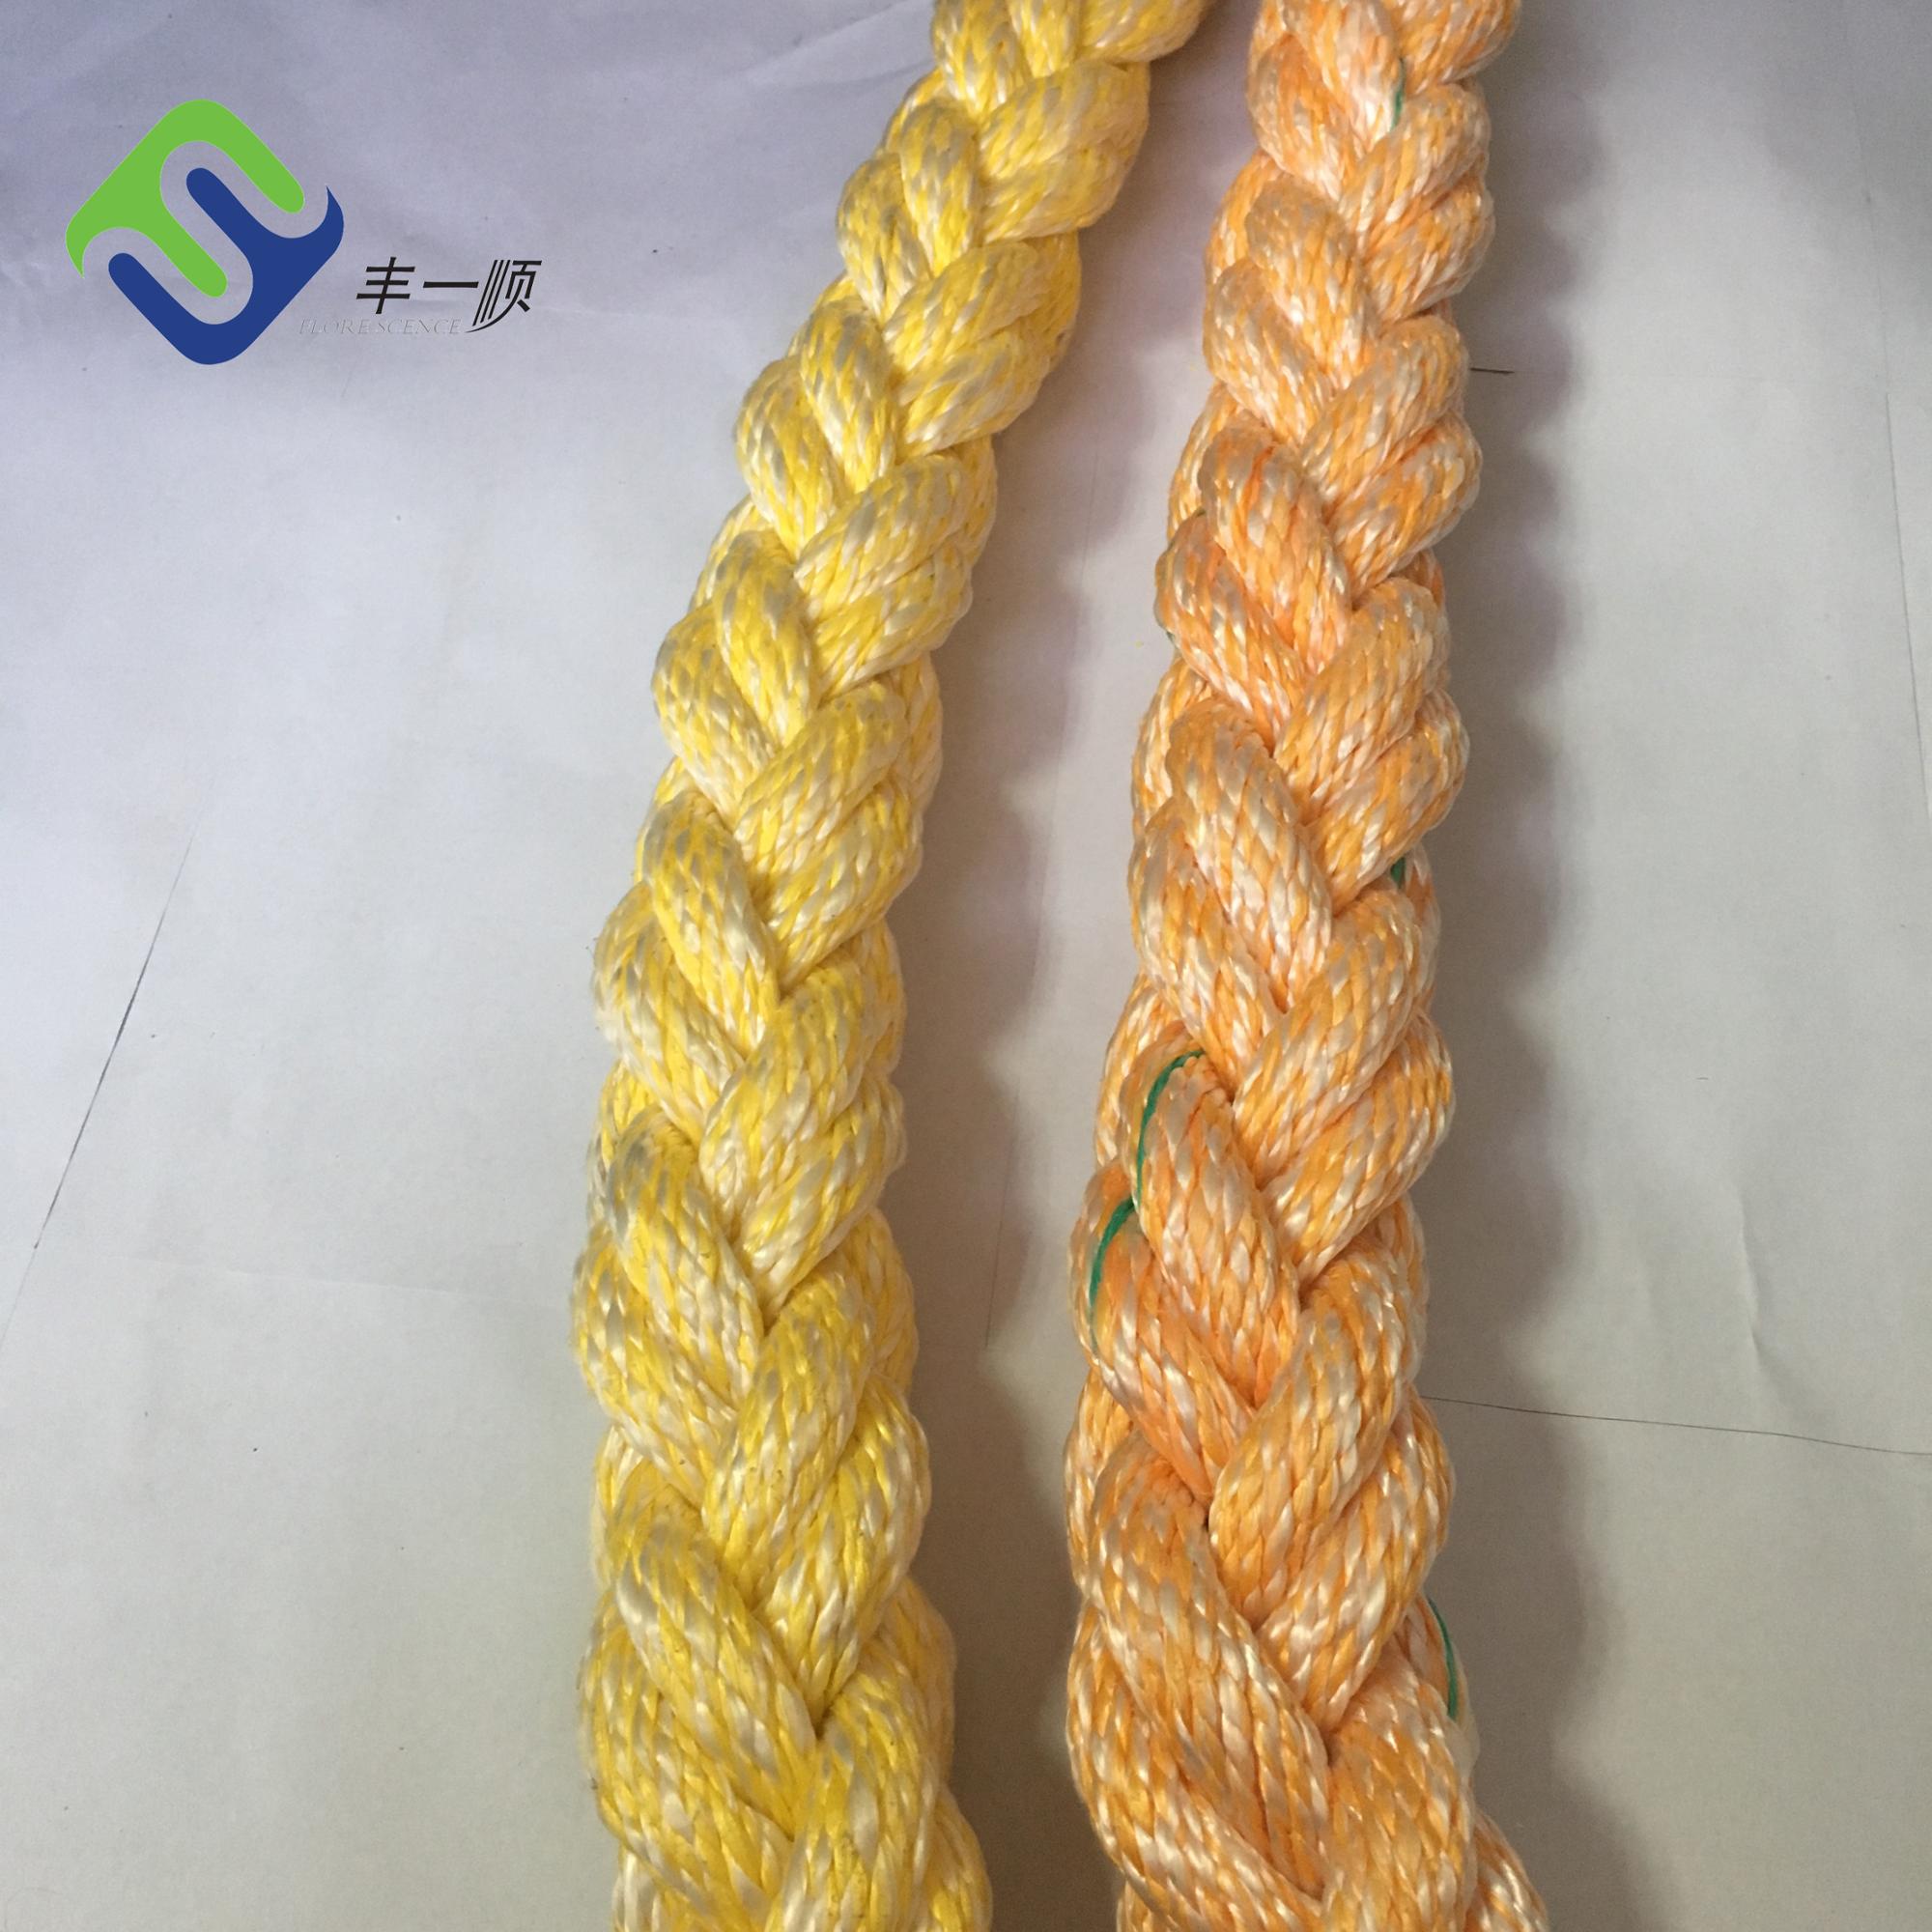 Low MOQ for Nylon Rope Pp Polyester Polyamide - Yellow Marine mooring 8 strand PP and Polyester mixed rope for sale  – Florescence